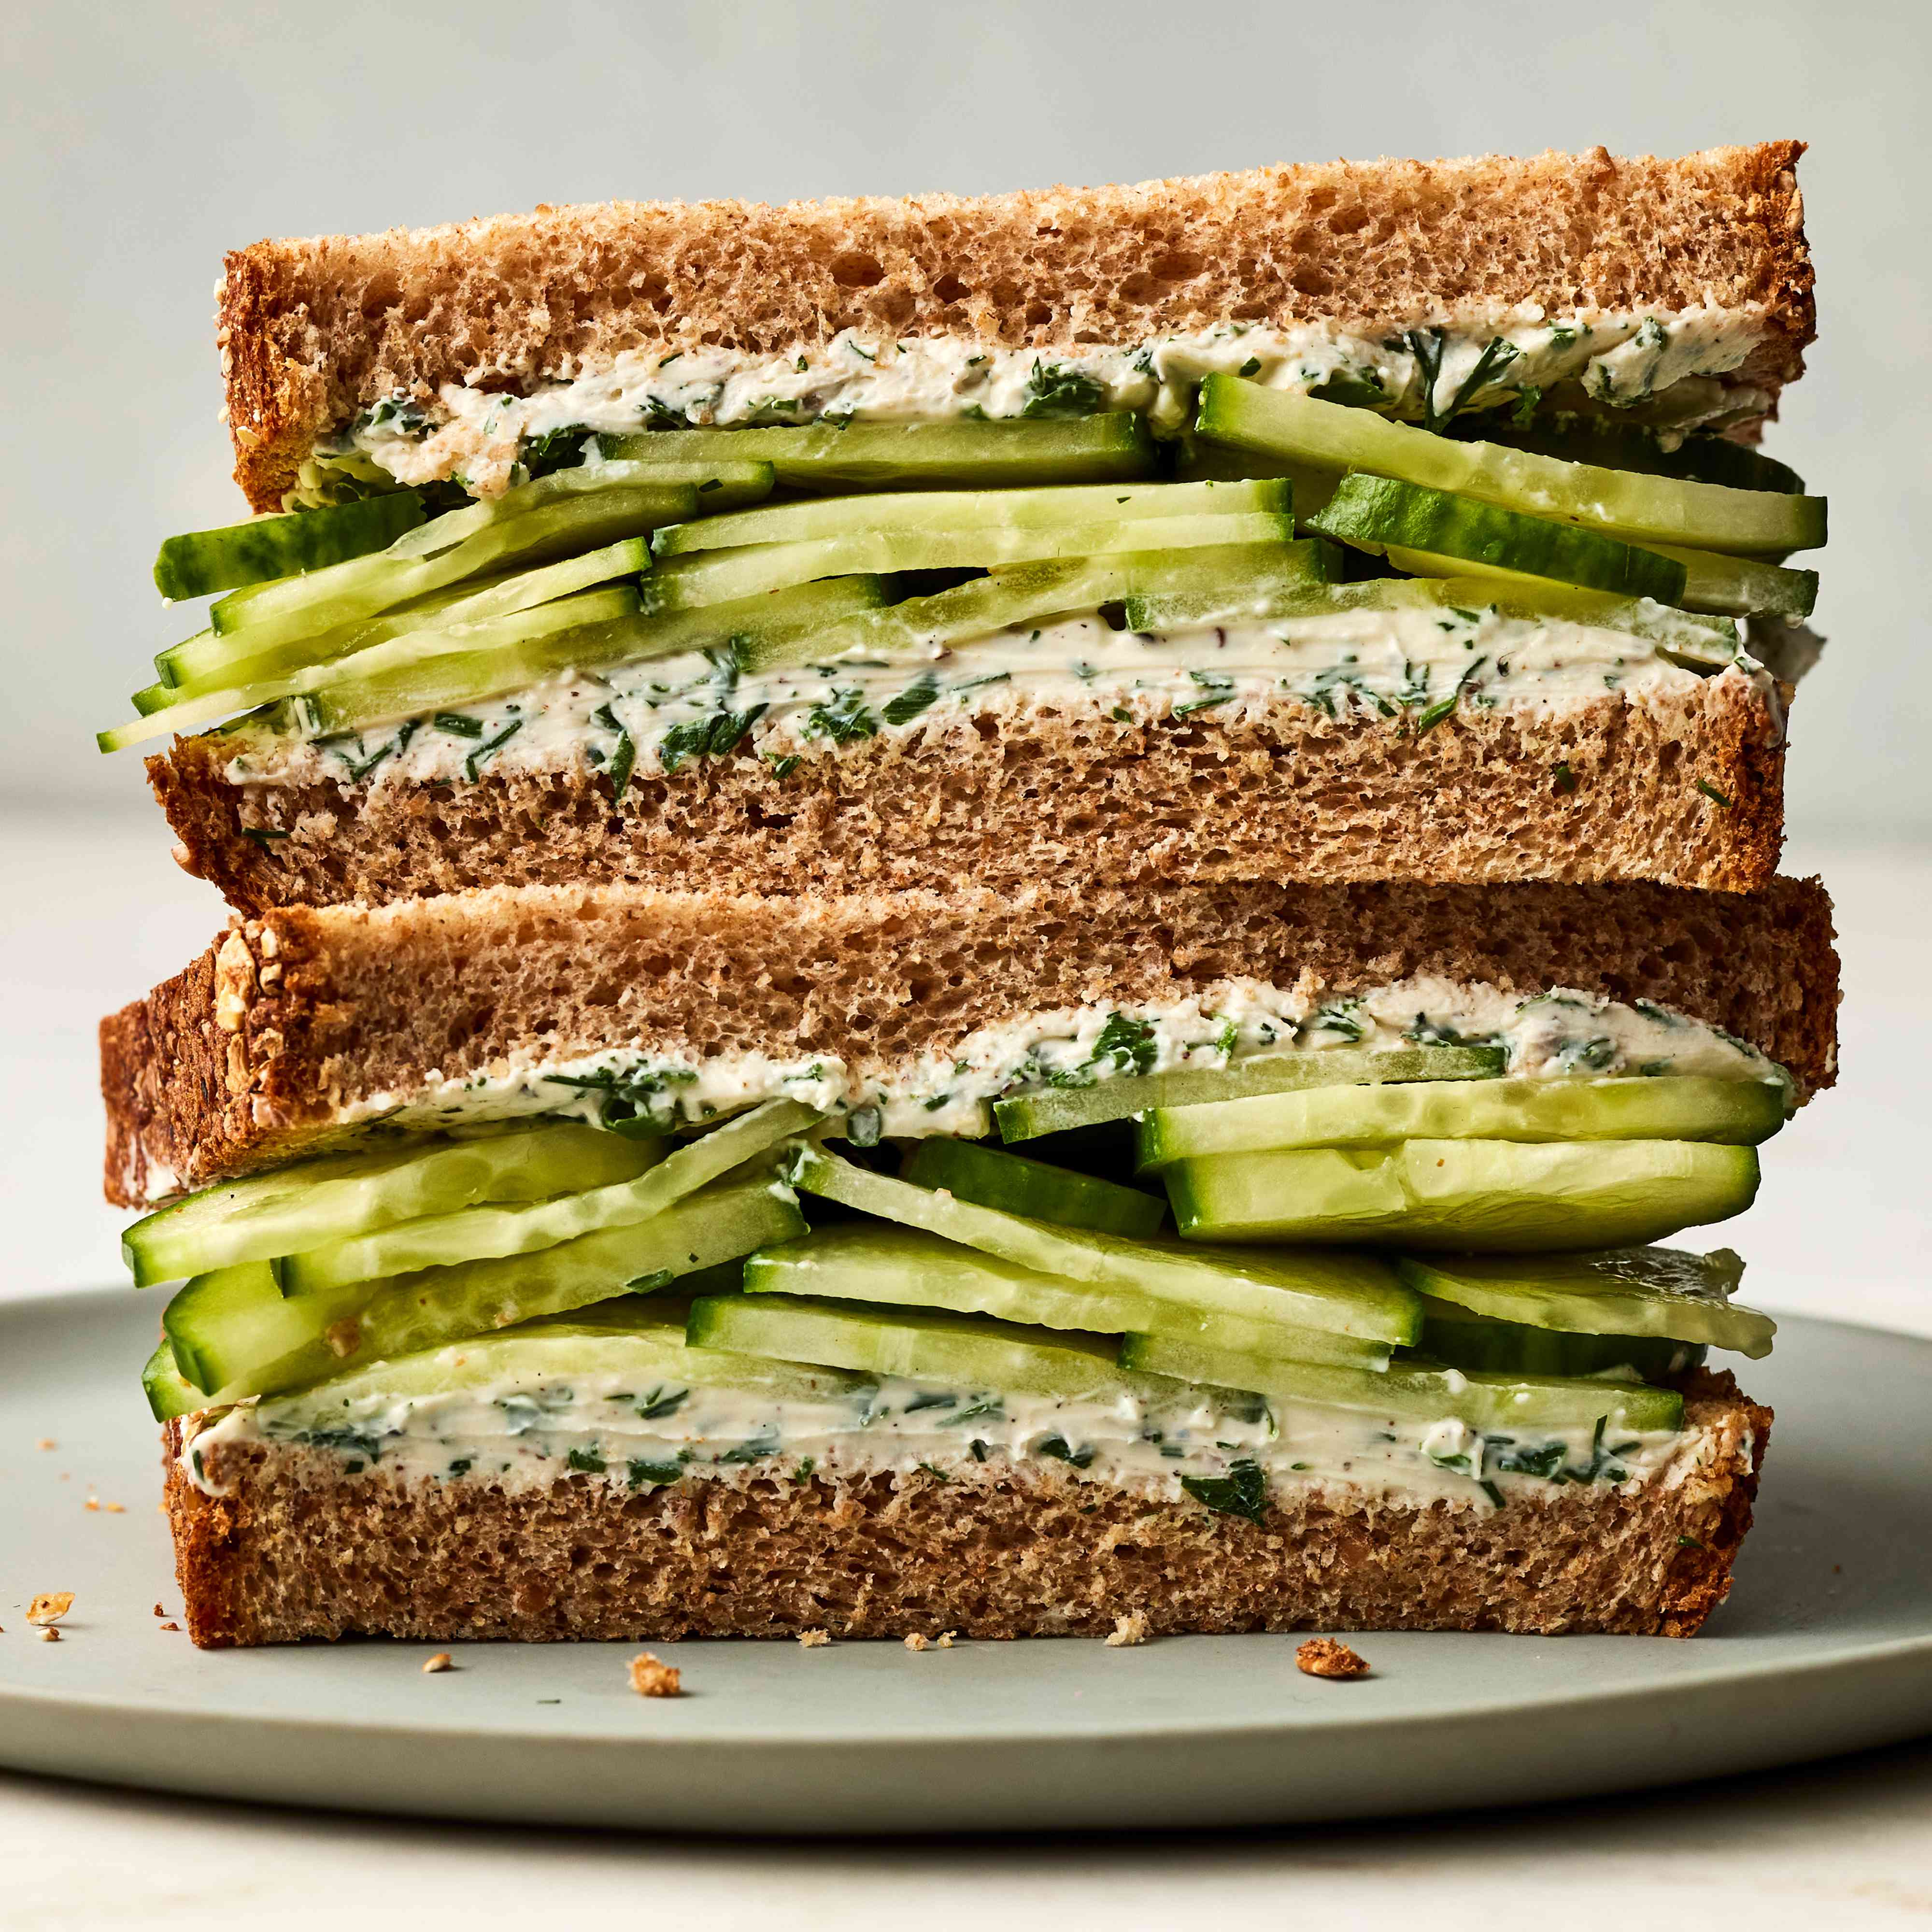 12 Cucumber Sandwiches You'll Want to Make All Summer Long